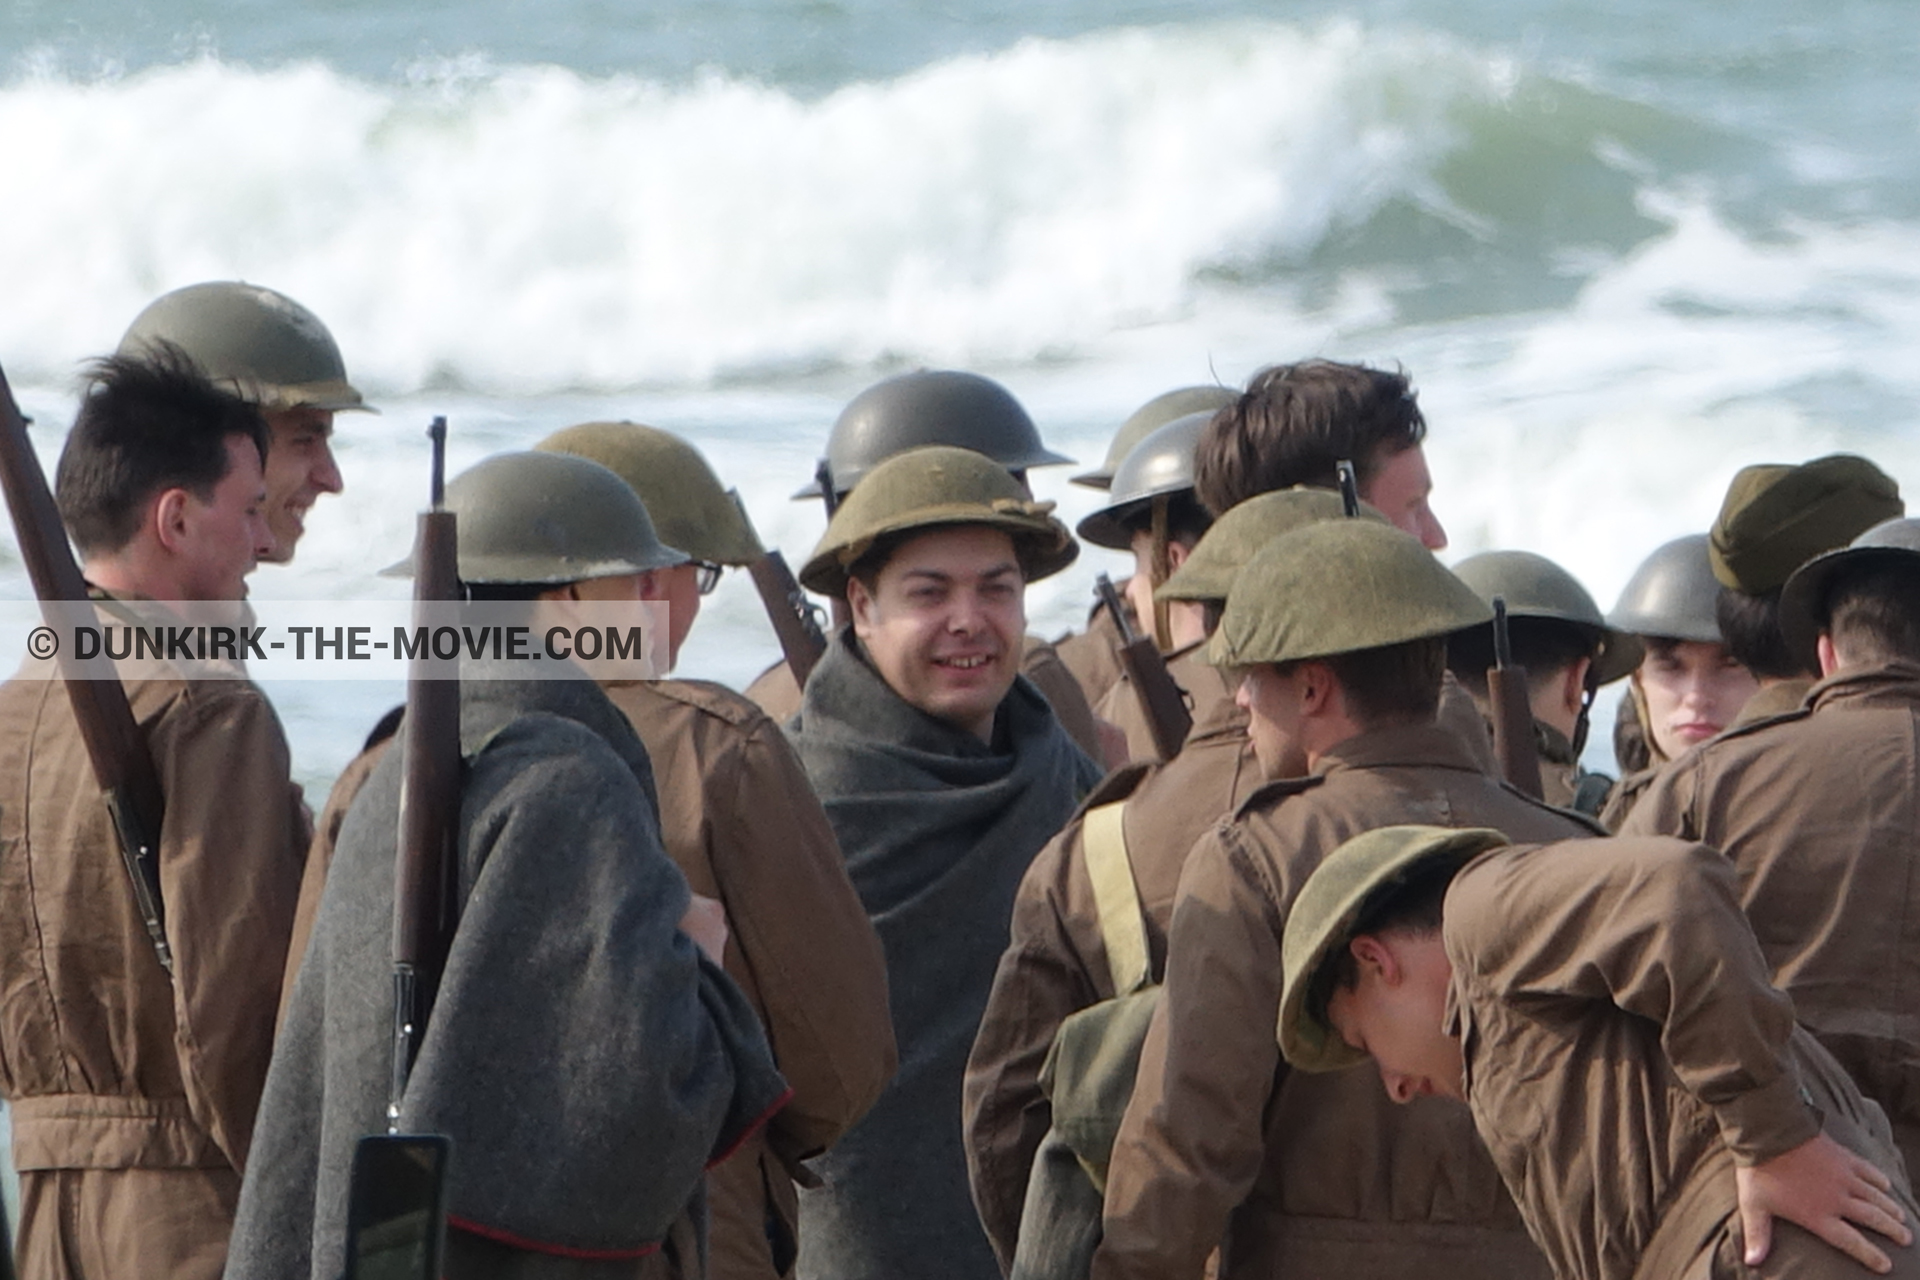 Picture with supernumeraries, rough sea,  from behind the scene of the Dunkirk movie by Nolan